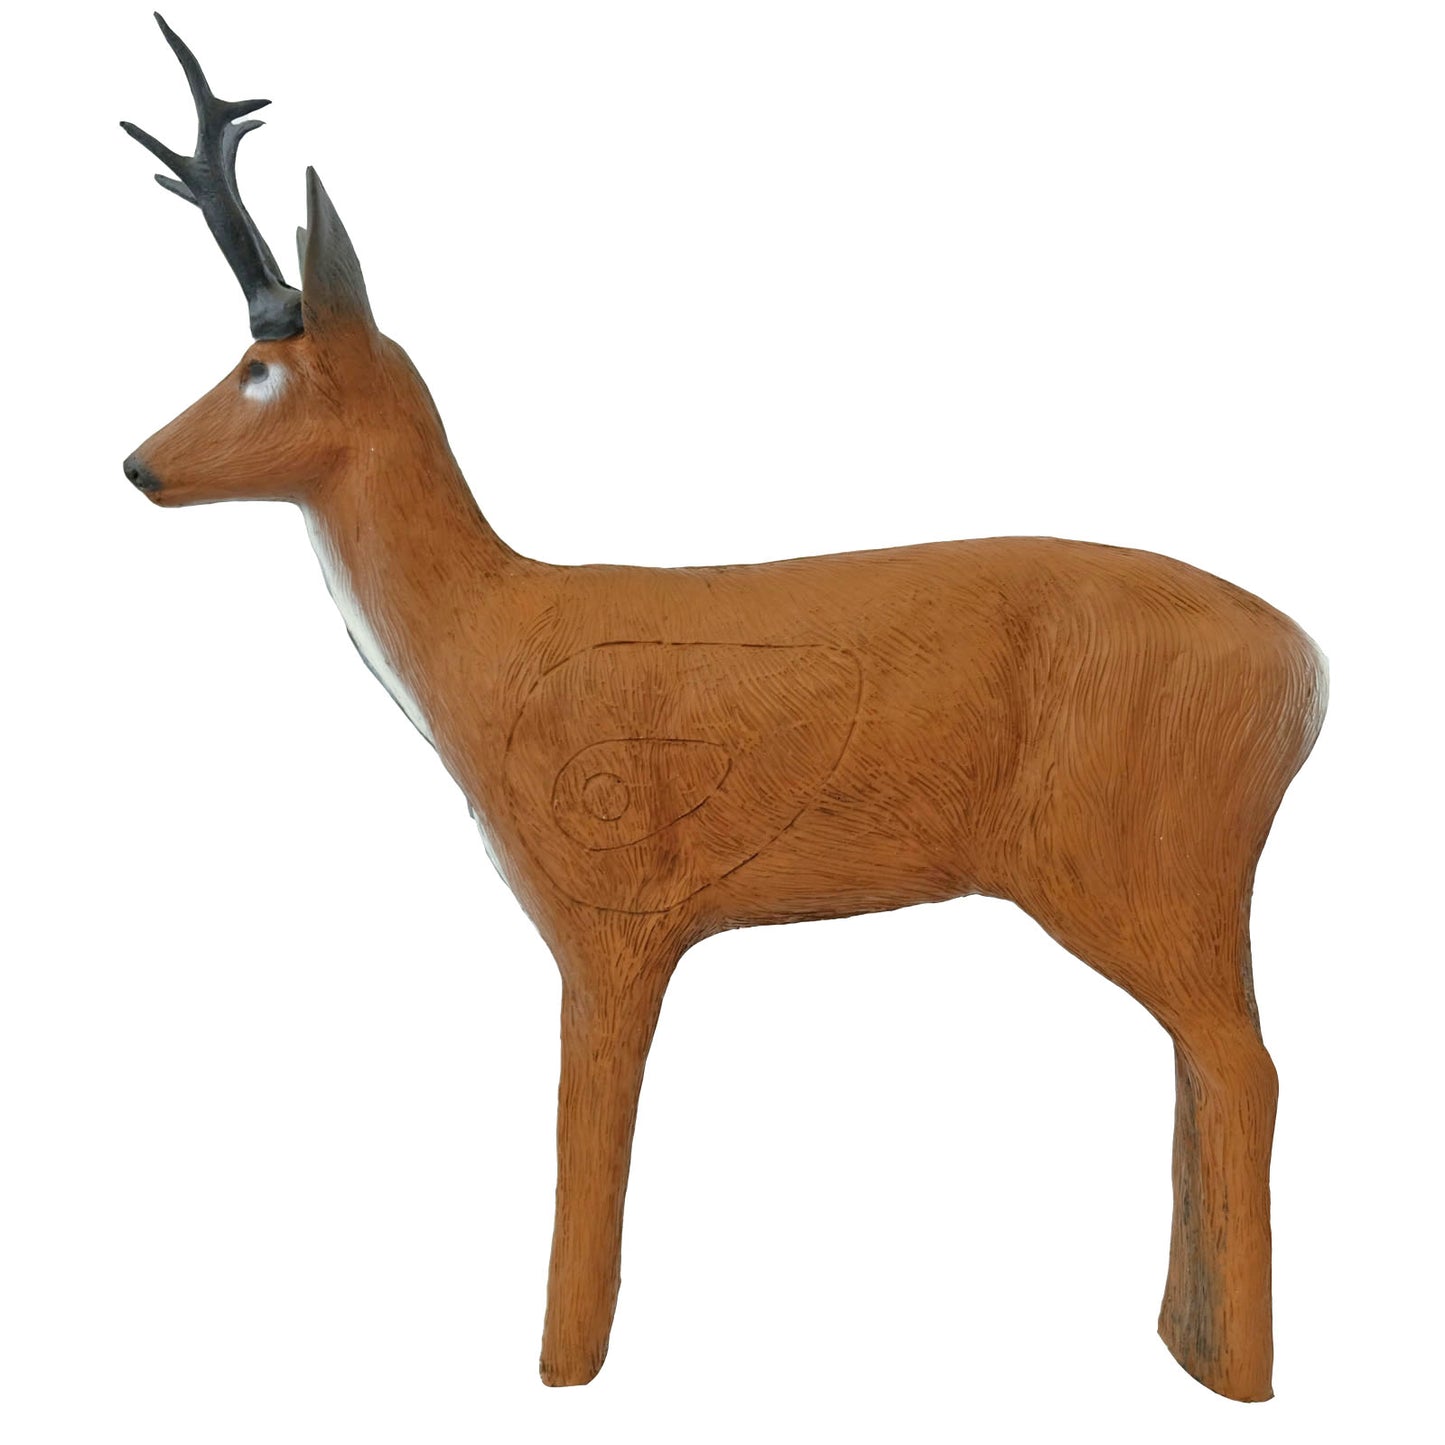 100244 Leitold Standing Buck